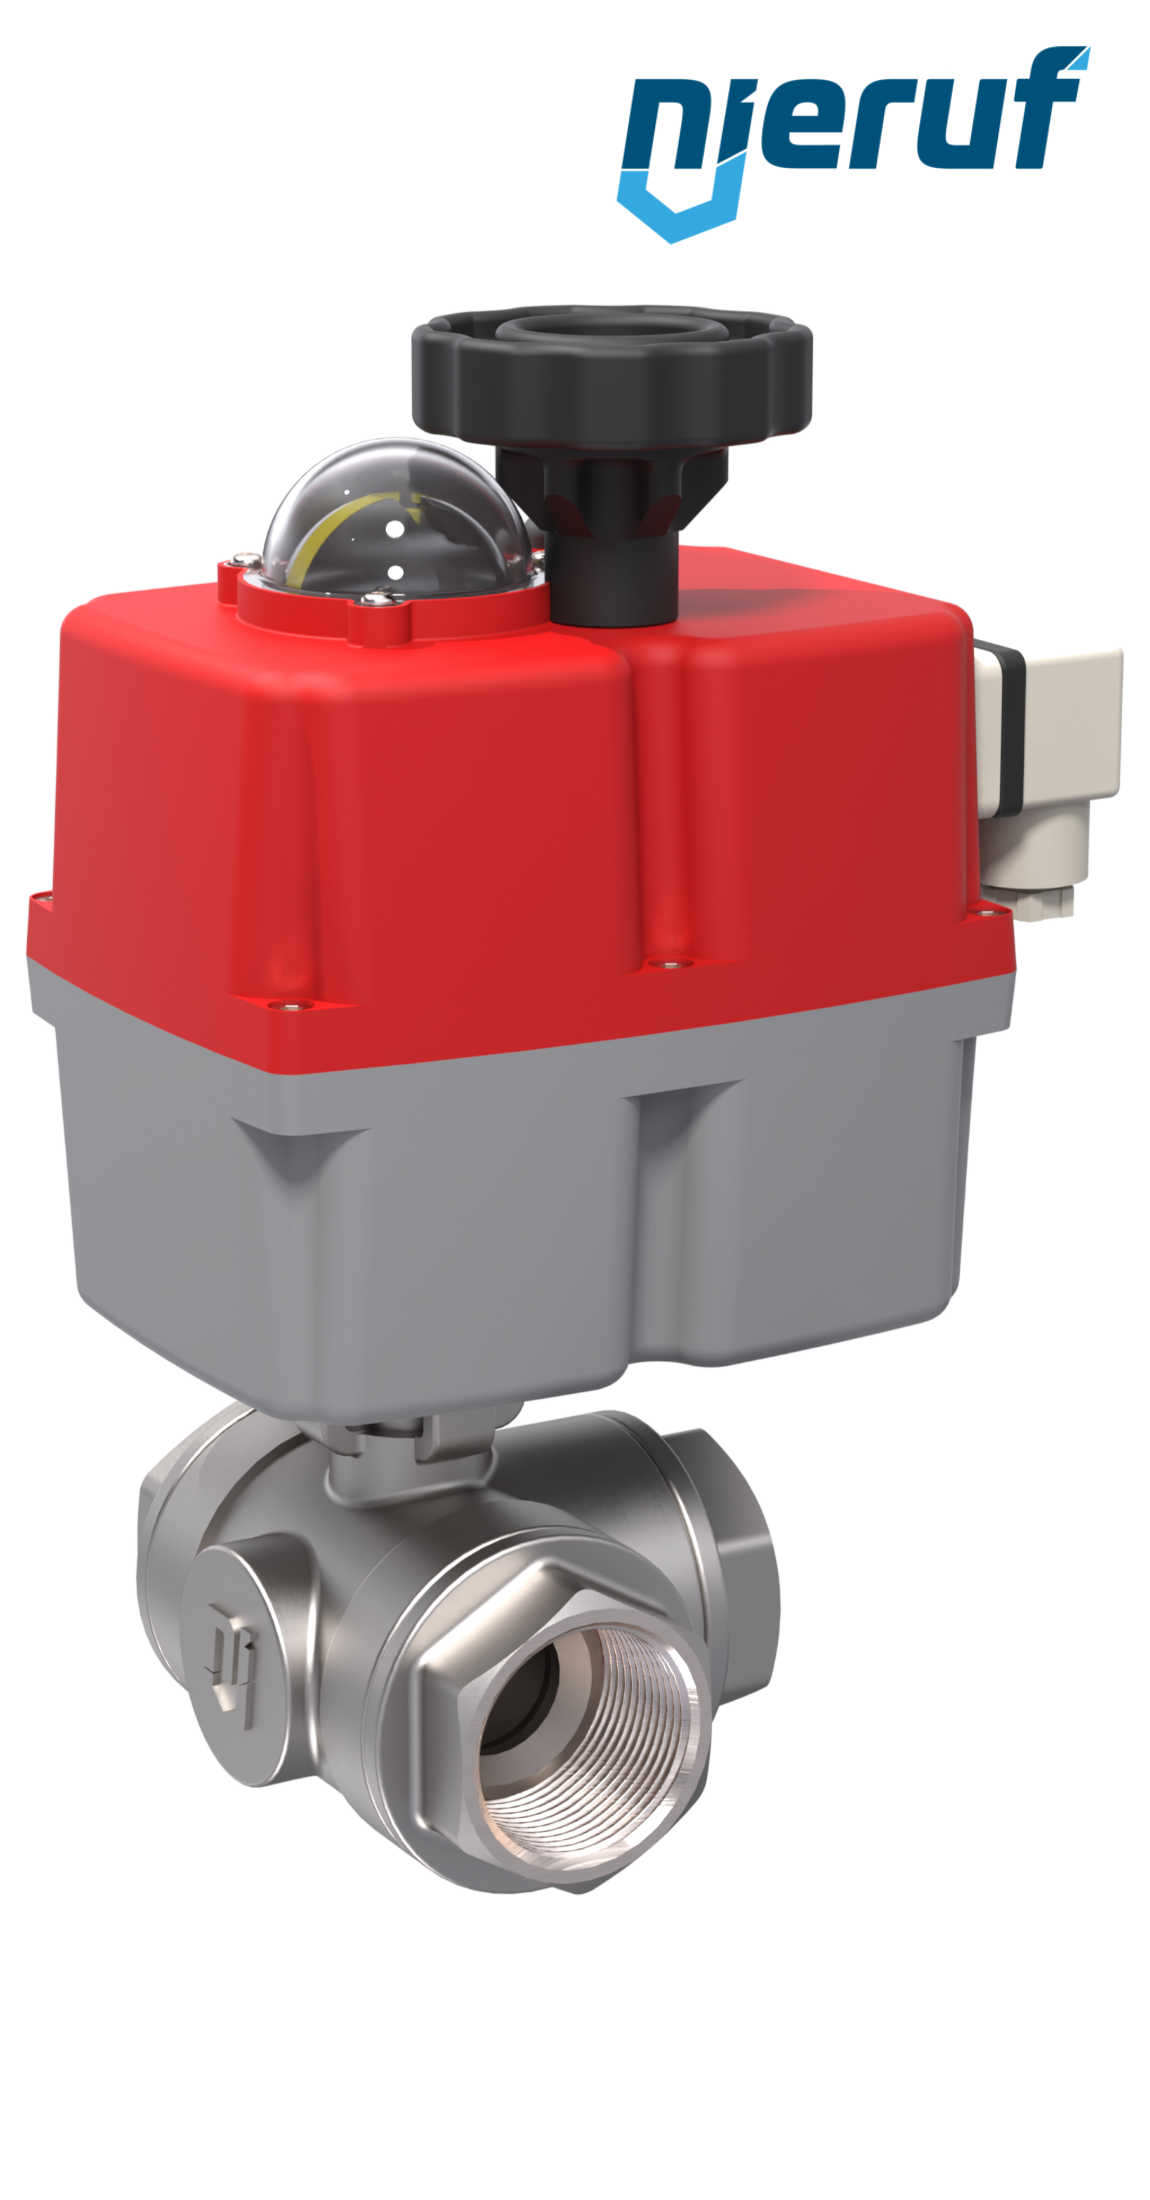 3 way automatic-ball valve 24-240V DN10 - 3/8" inch stainless steel reduced port design with L drilling